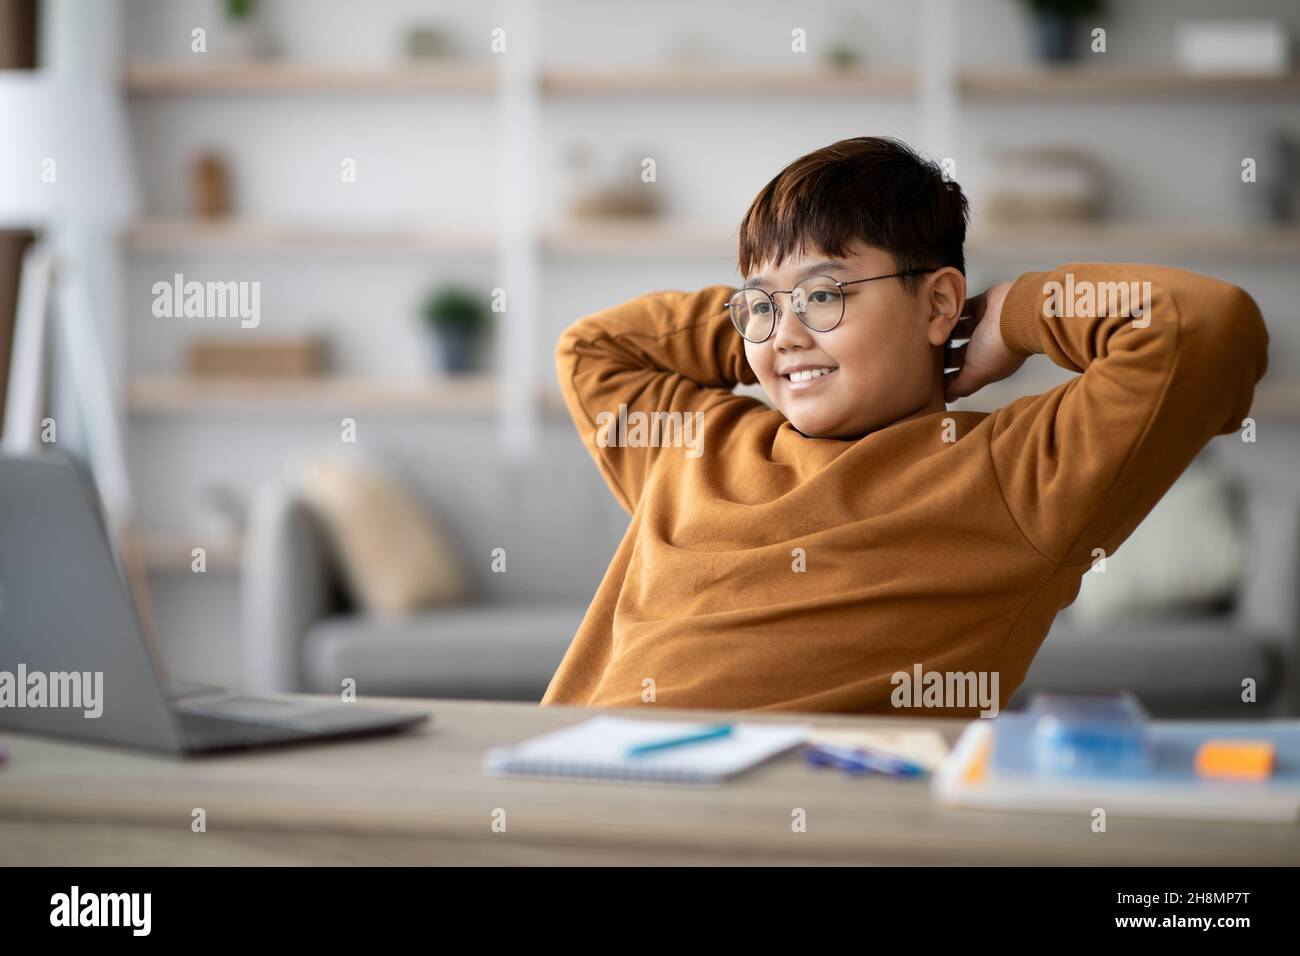 Relaxed asian boy looking at notebook screen and smiling Stock Photo